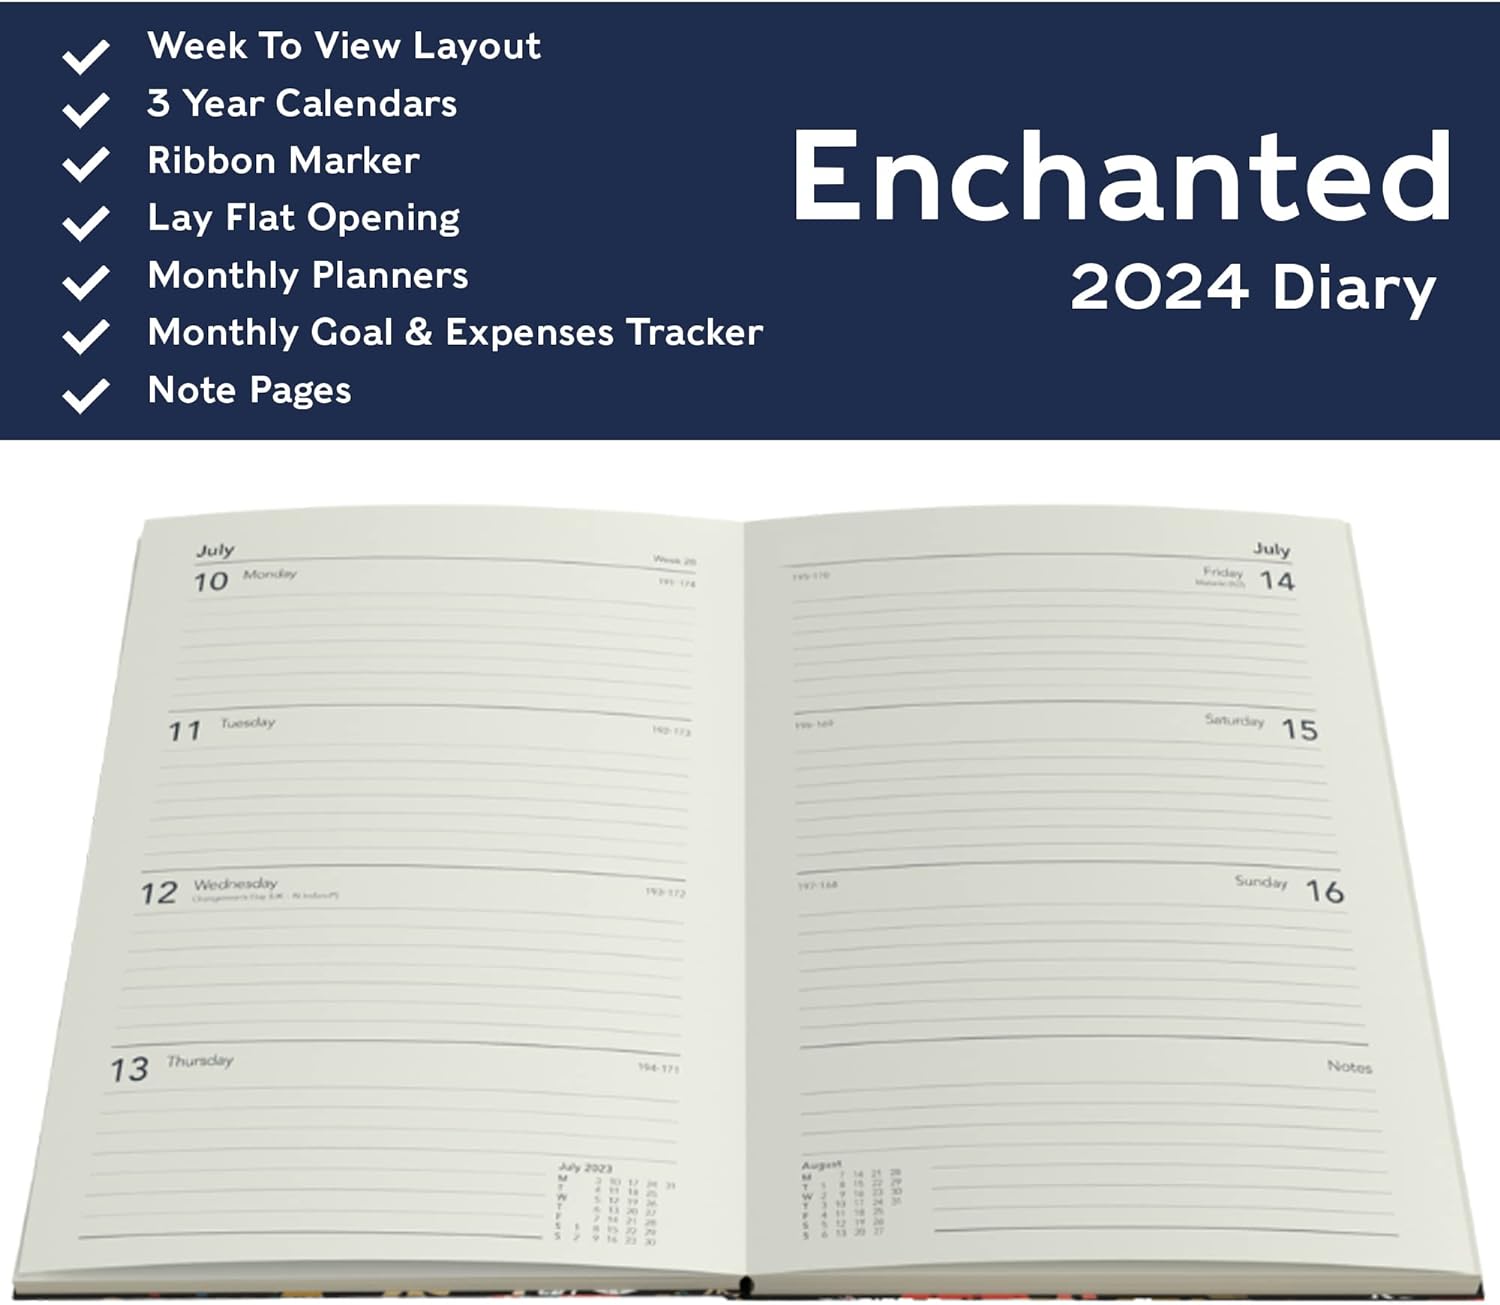 Light Blue Collins Enchanted Pocket Week To View Format 2024 Year Diary Planner